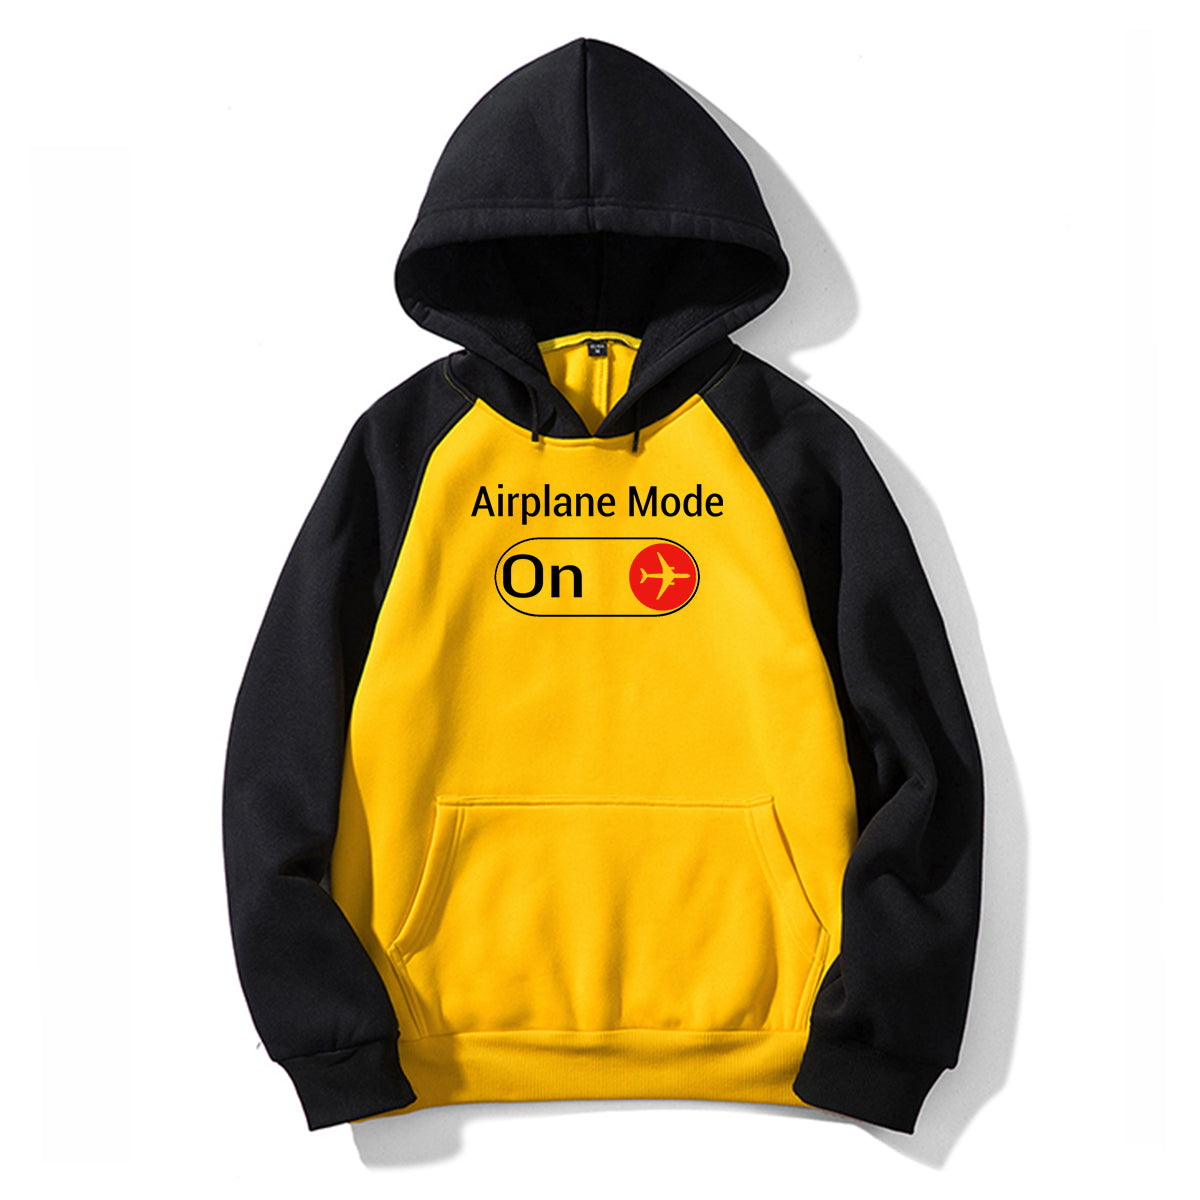 Airplane Mode On Designed Colourful Hoodies